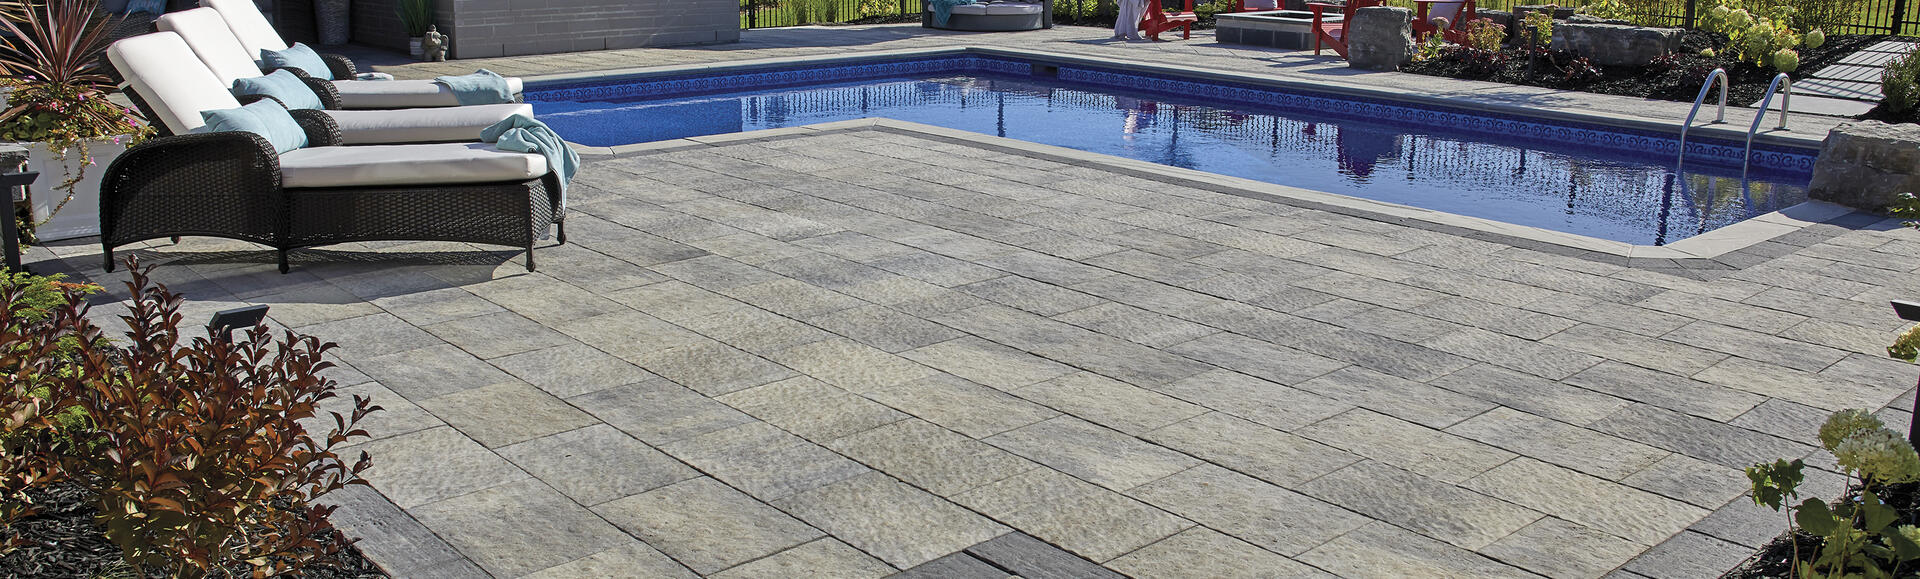 Patio with pool using Rialto products from Brampton Brick